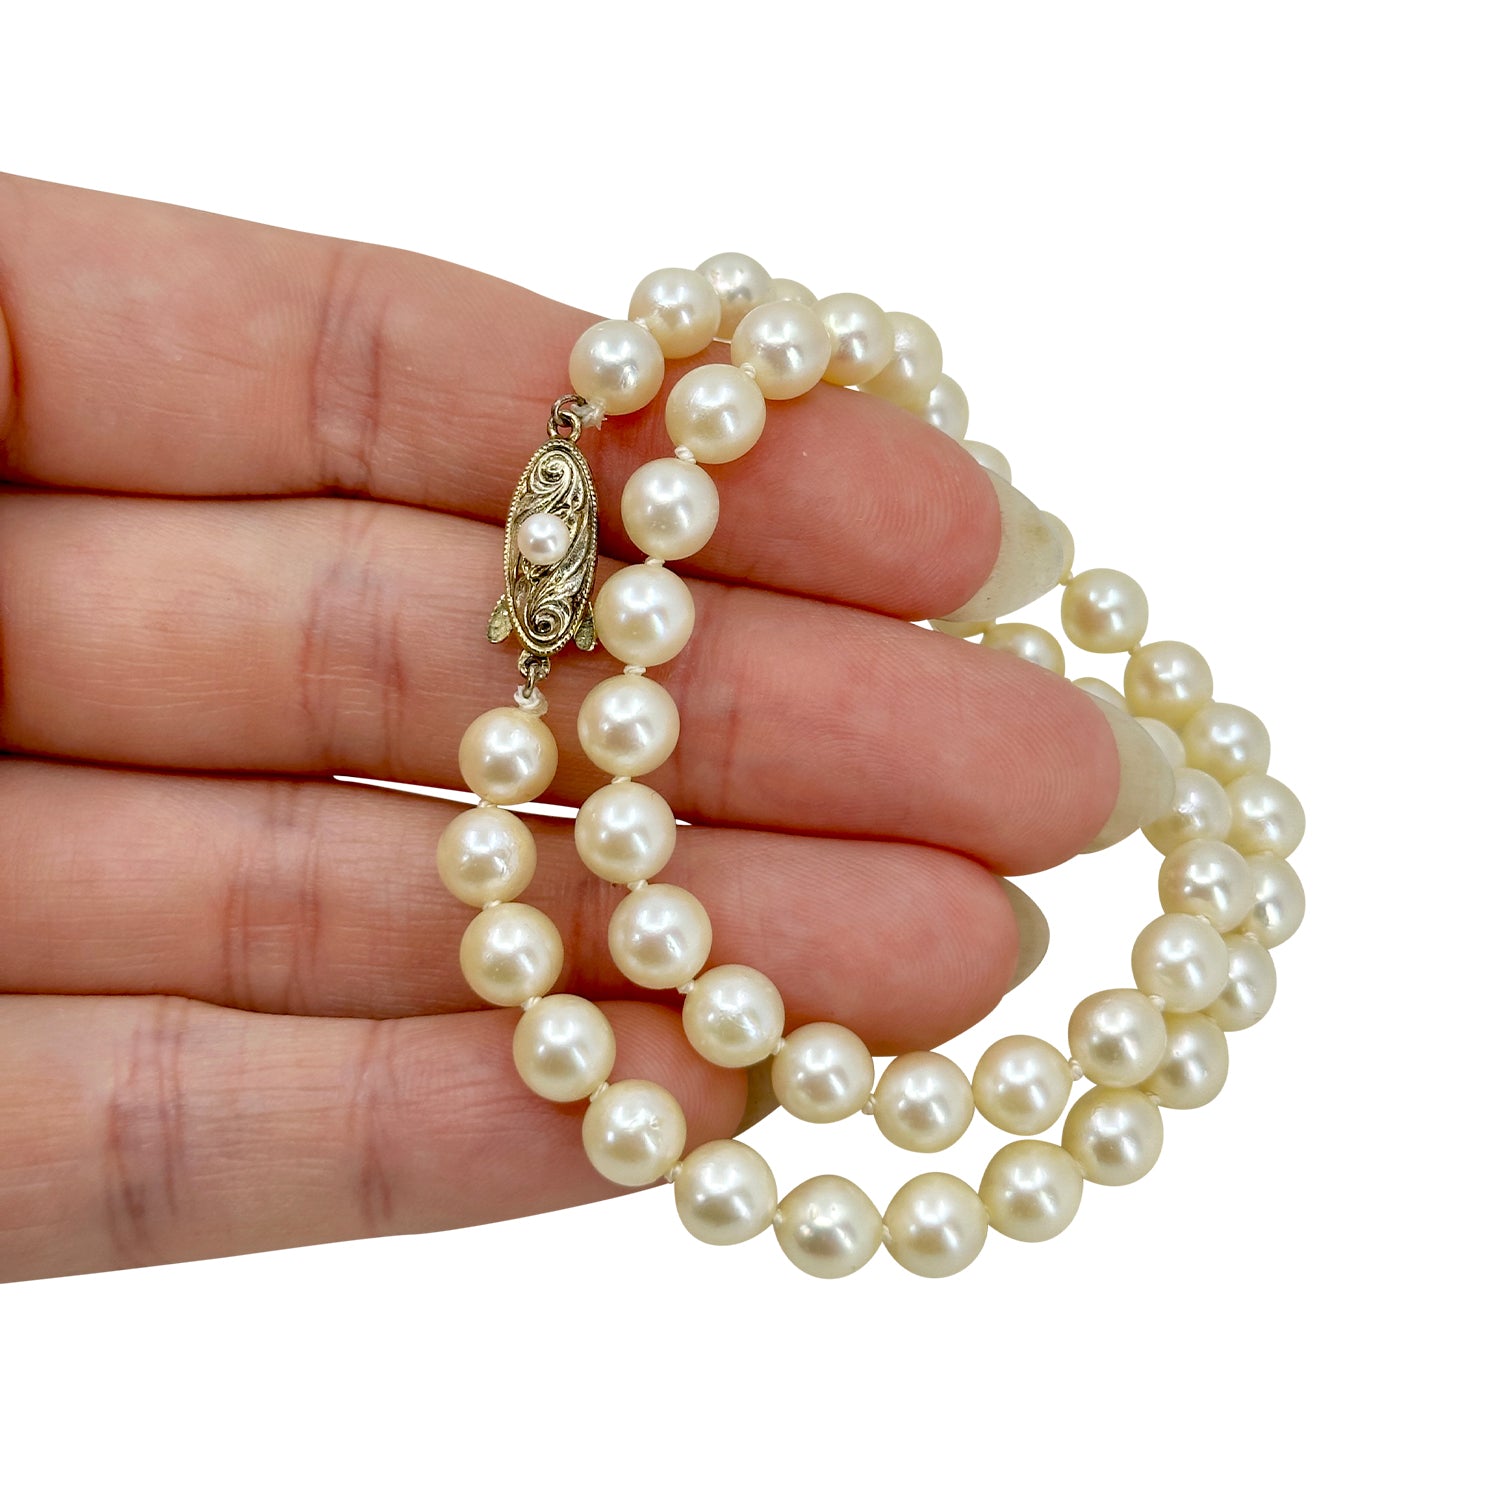 Choker Vintage Japanese Saltwater Akoya Cultured Pearl Necklace - Sterling Silver Gold Filled 13.75 Inch